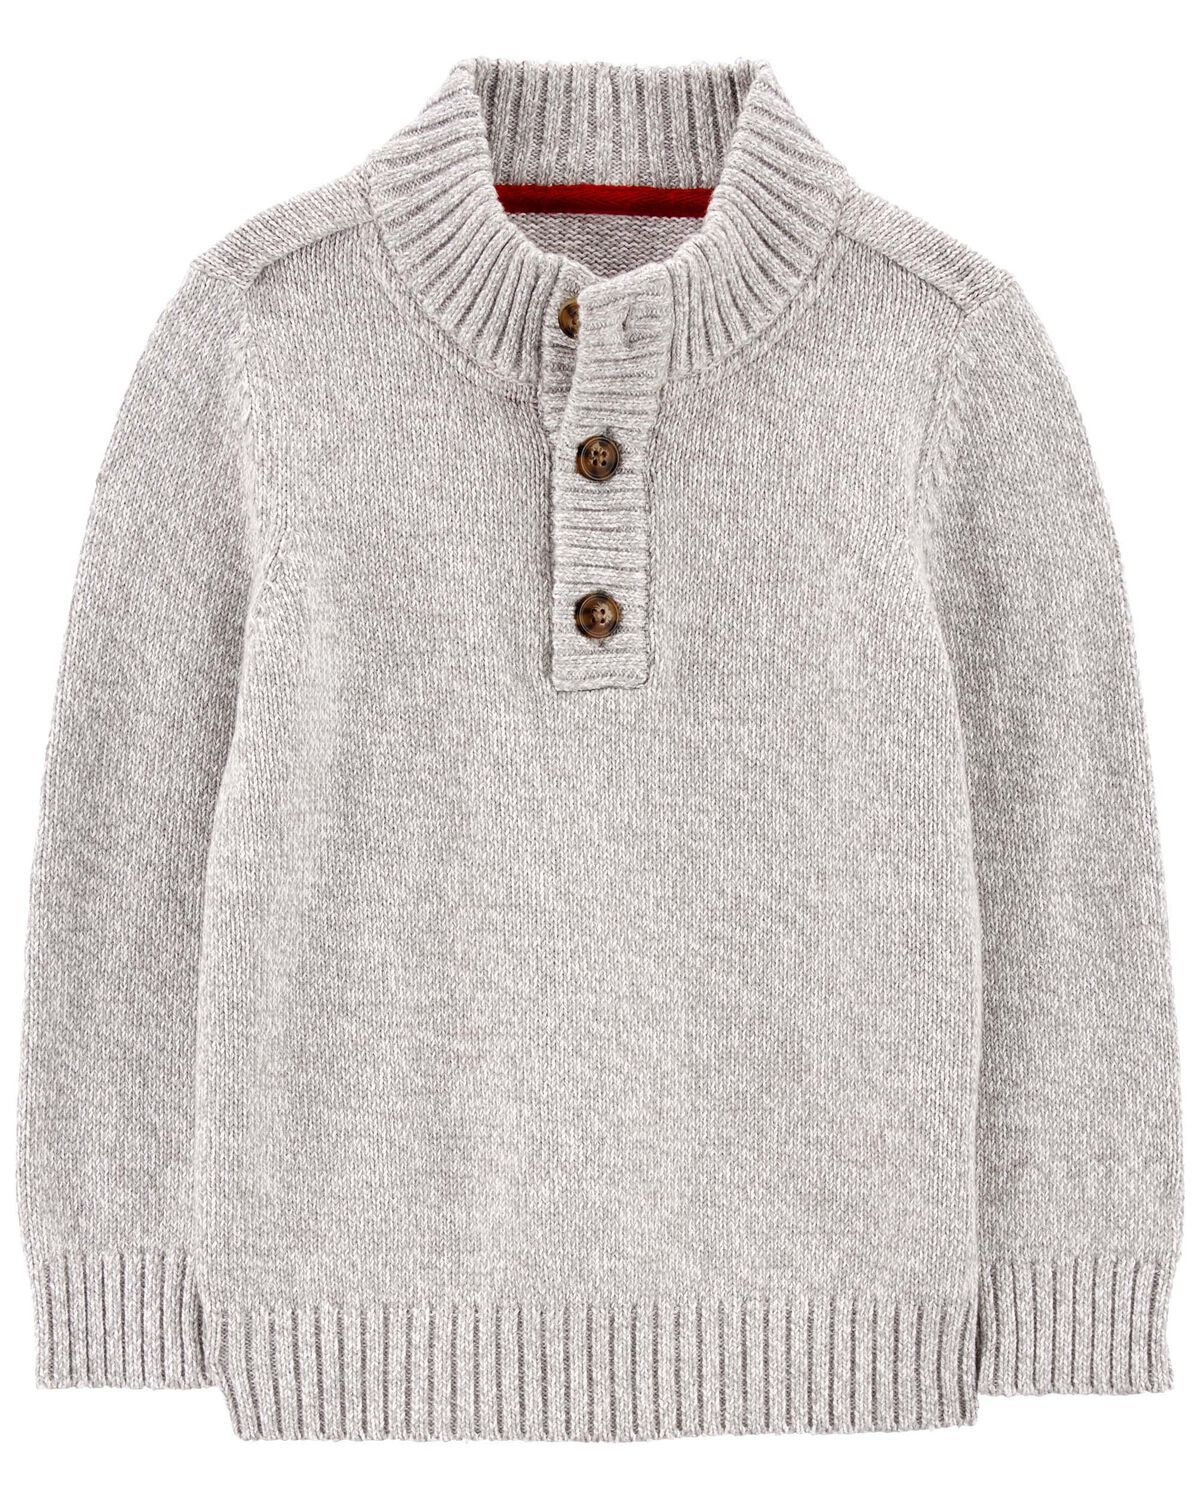 Grey Toddler Pullover Cotton Sweater | carters.com